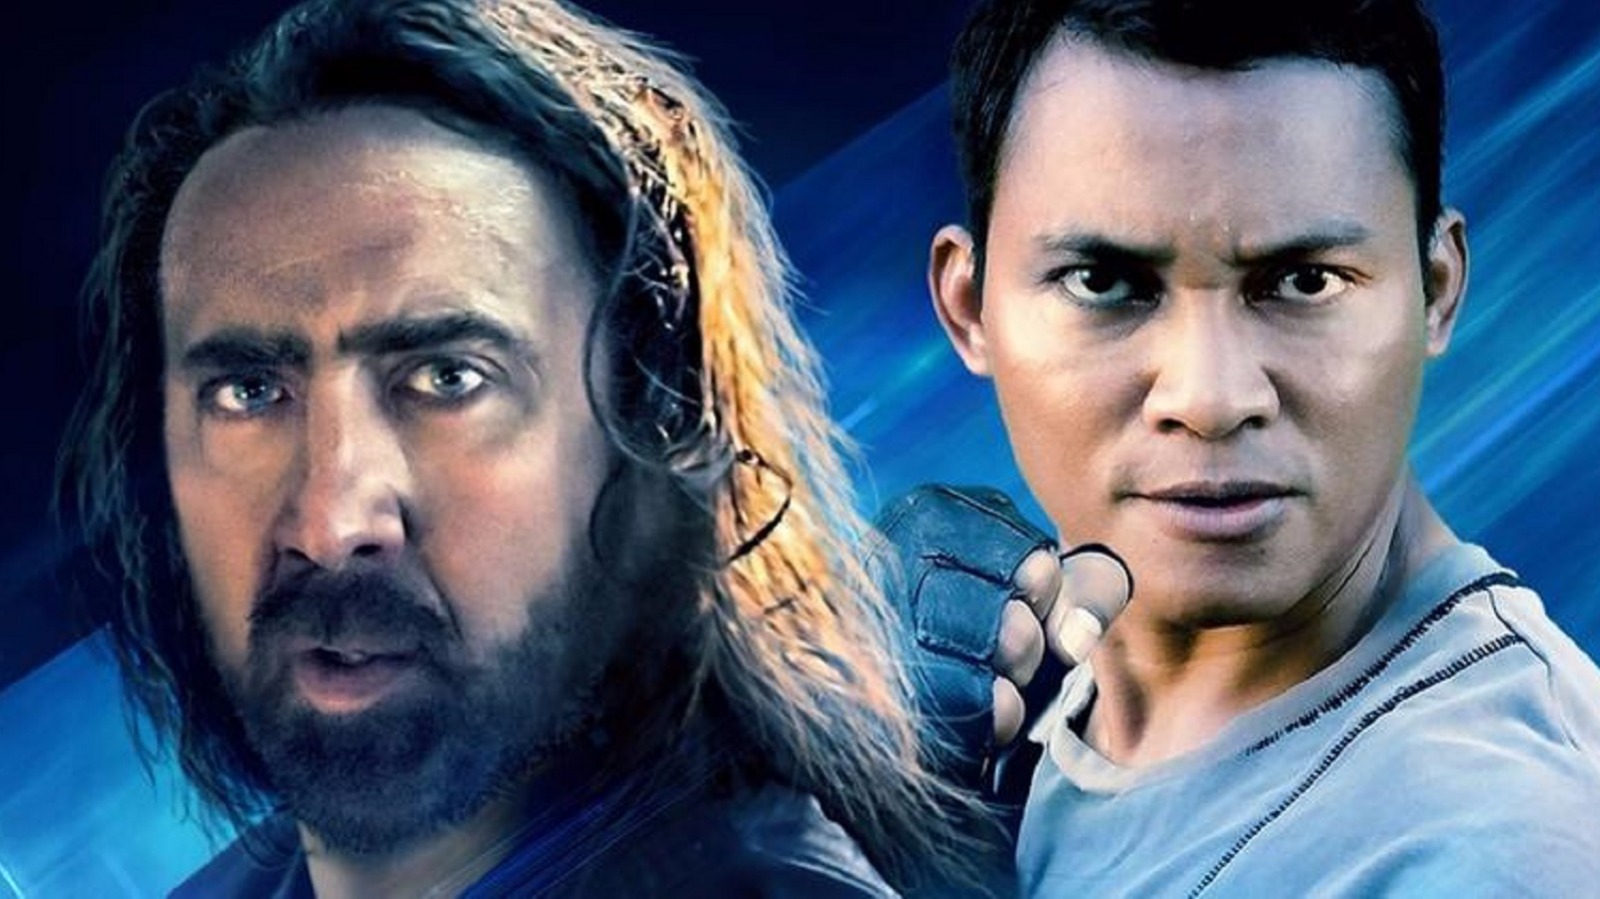 Nicolas Cage Will Fight Alien Invaders In His Newest Movie His imdb page lists 15 roles since 2011, with another 10 more in various stages of production and development for that's why, until earlier this week, i had never seen cage's 2007 film next. nicolas cage will fight alien invaders